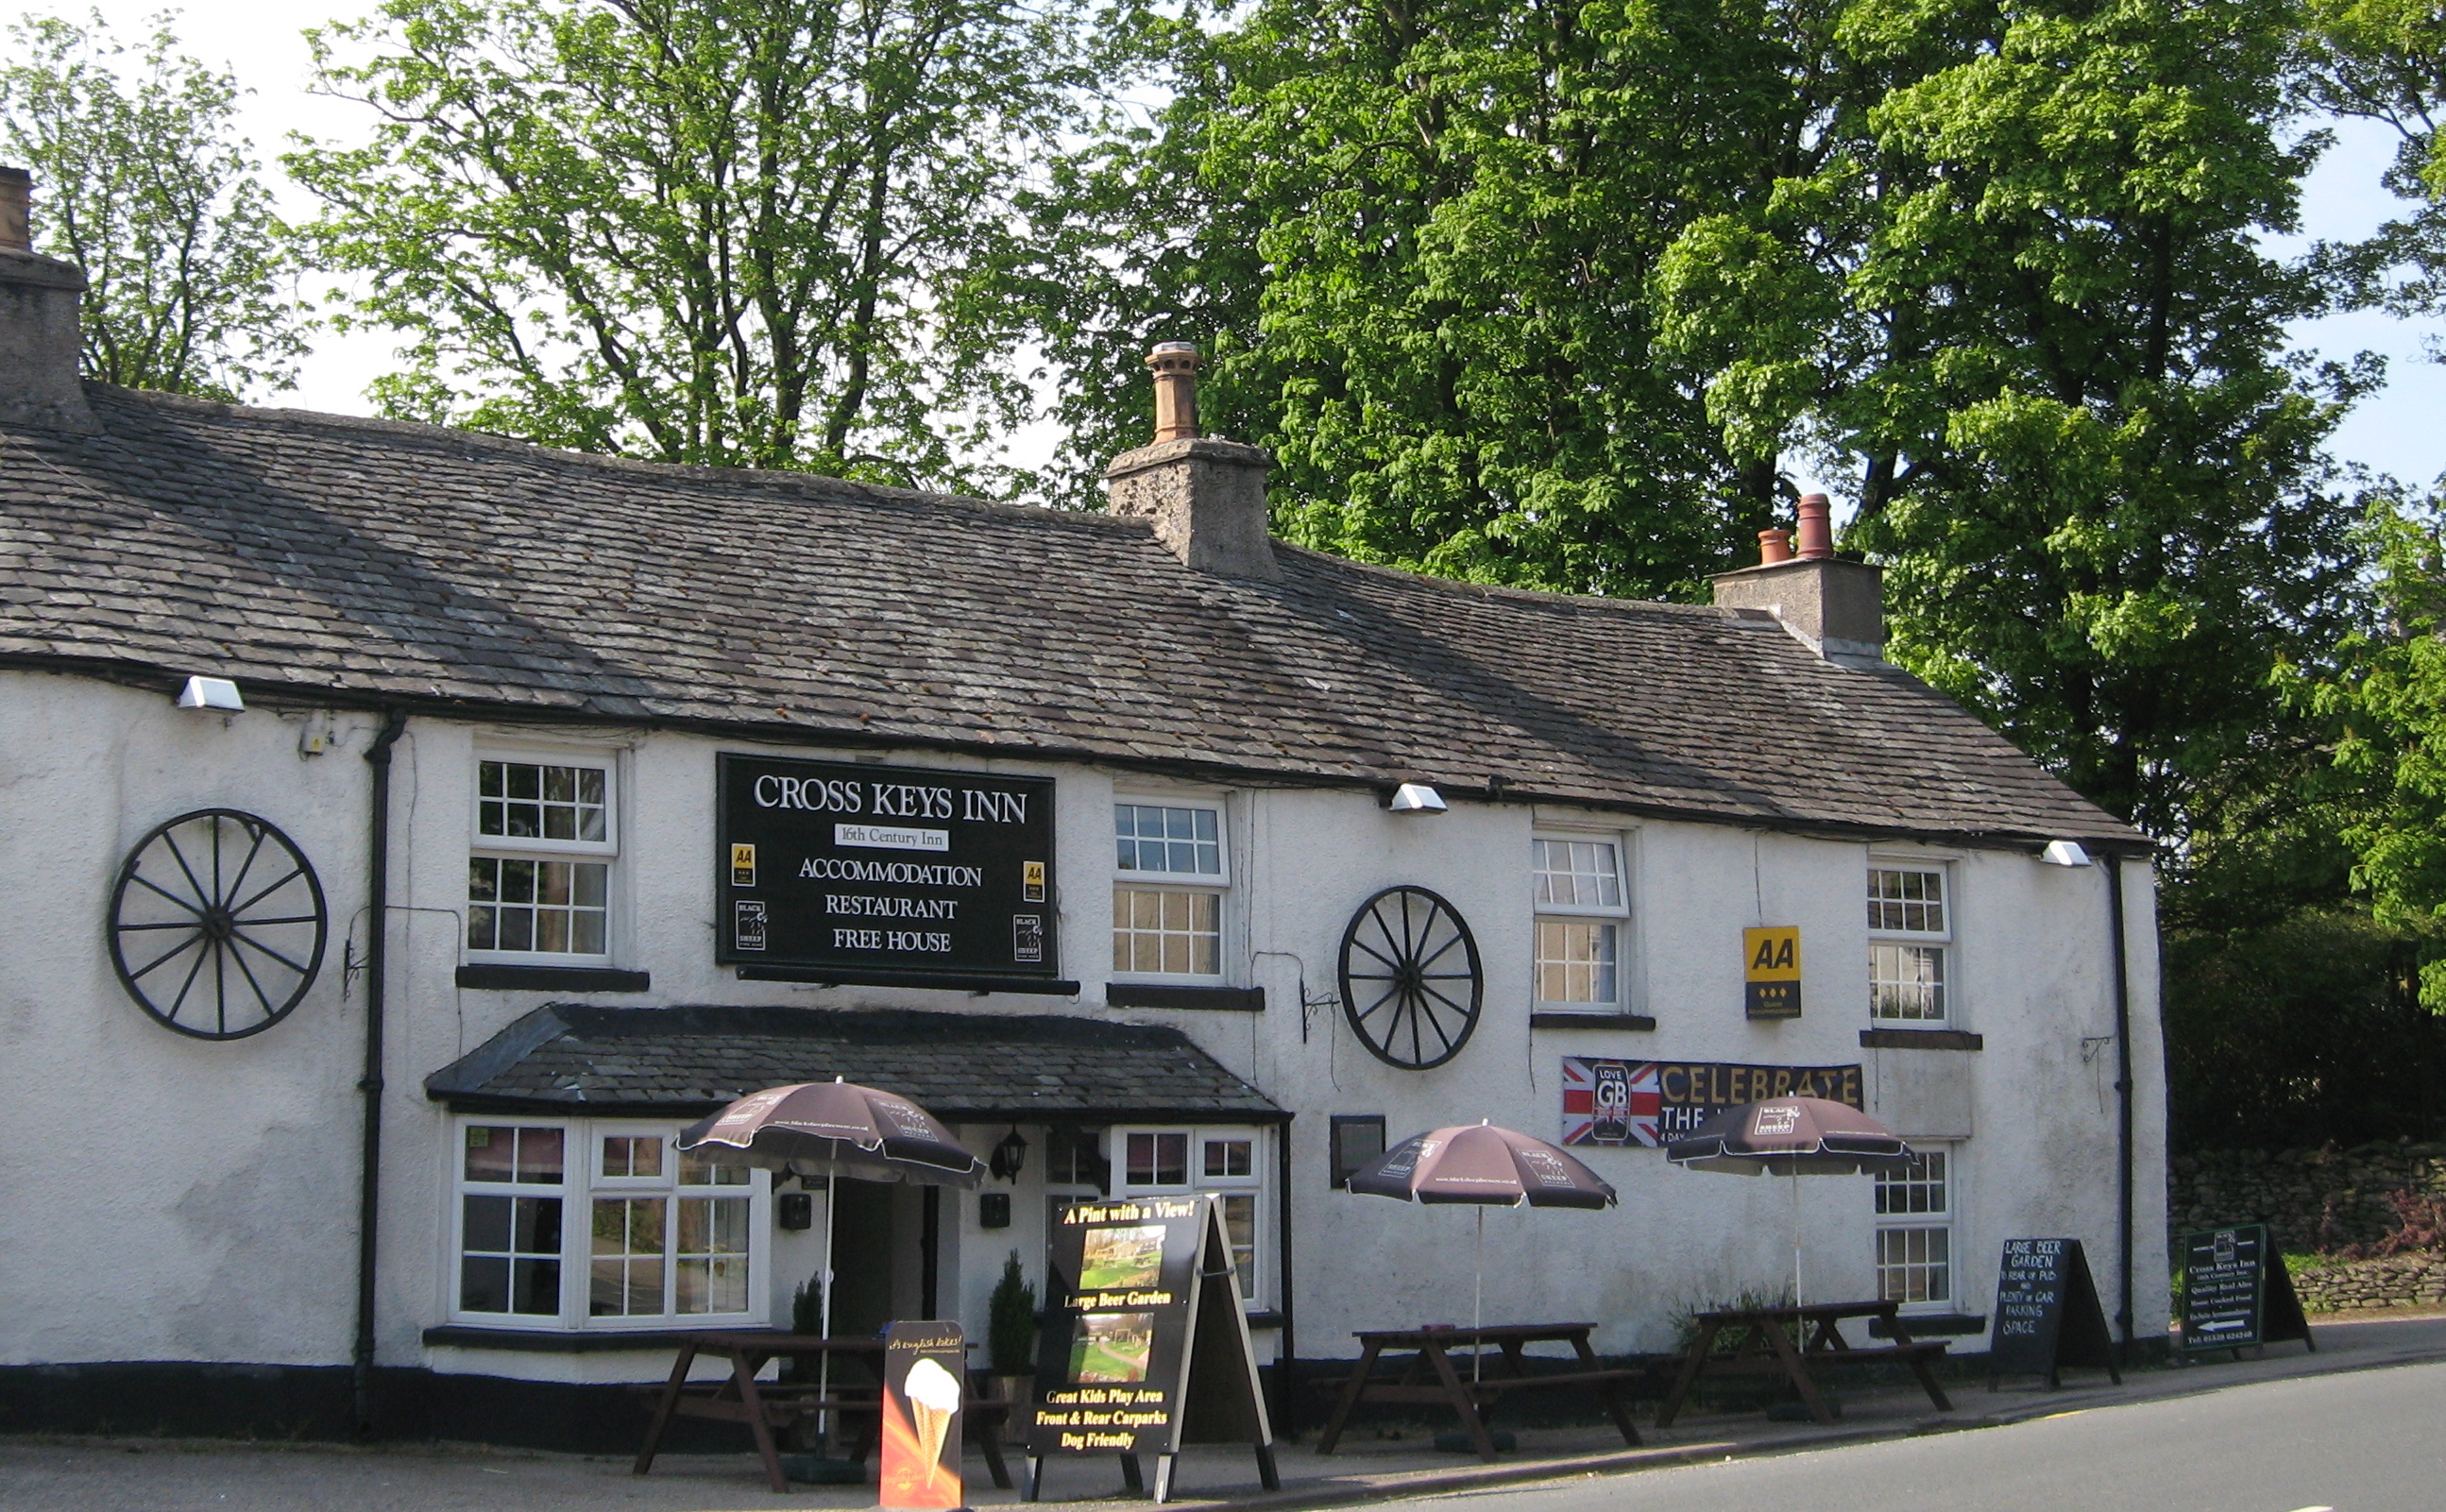 A pub in the Lake District on our way to Scotland.  Photo by me